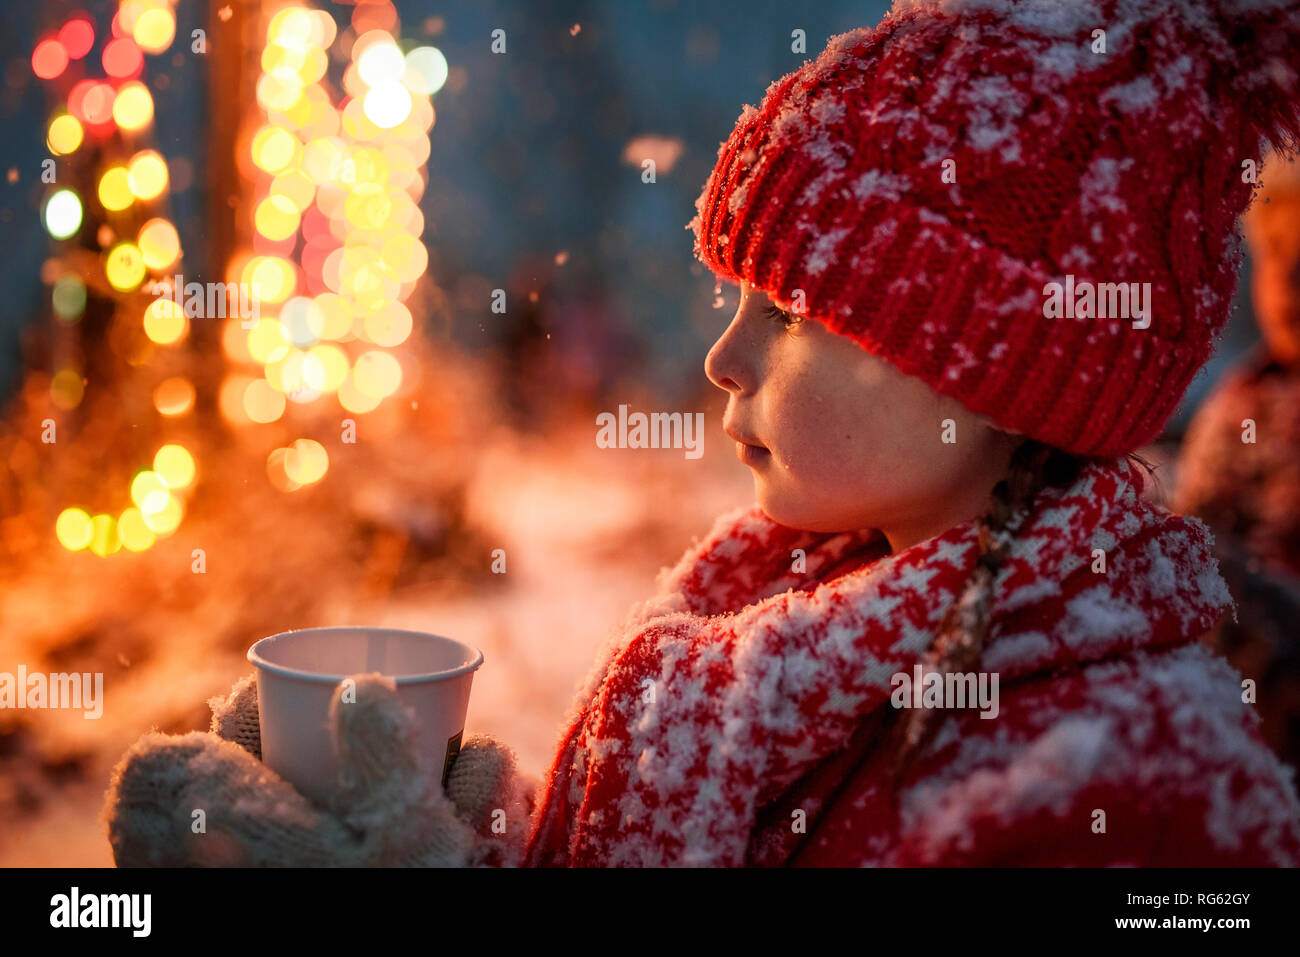 Girl standing outdoors tenant une boisson au chocolat chaud, United States Banque D'Images